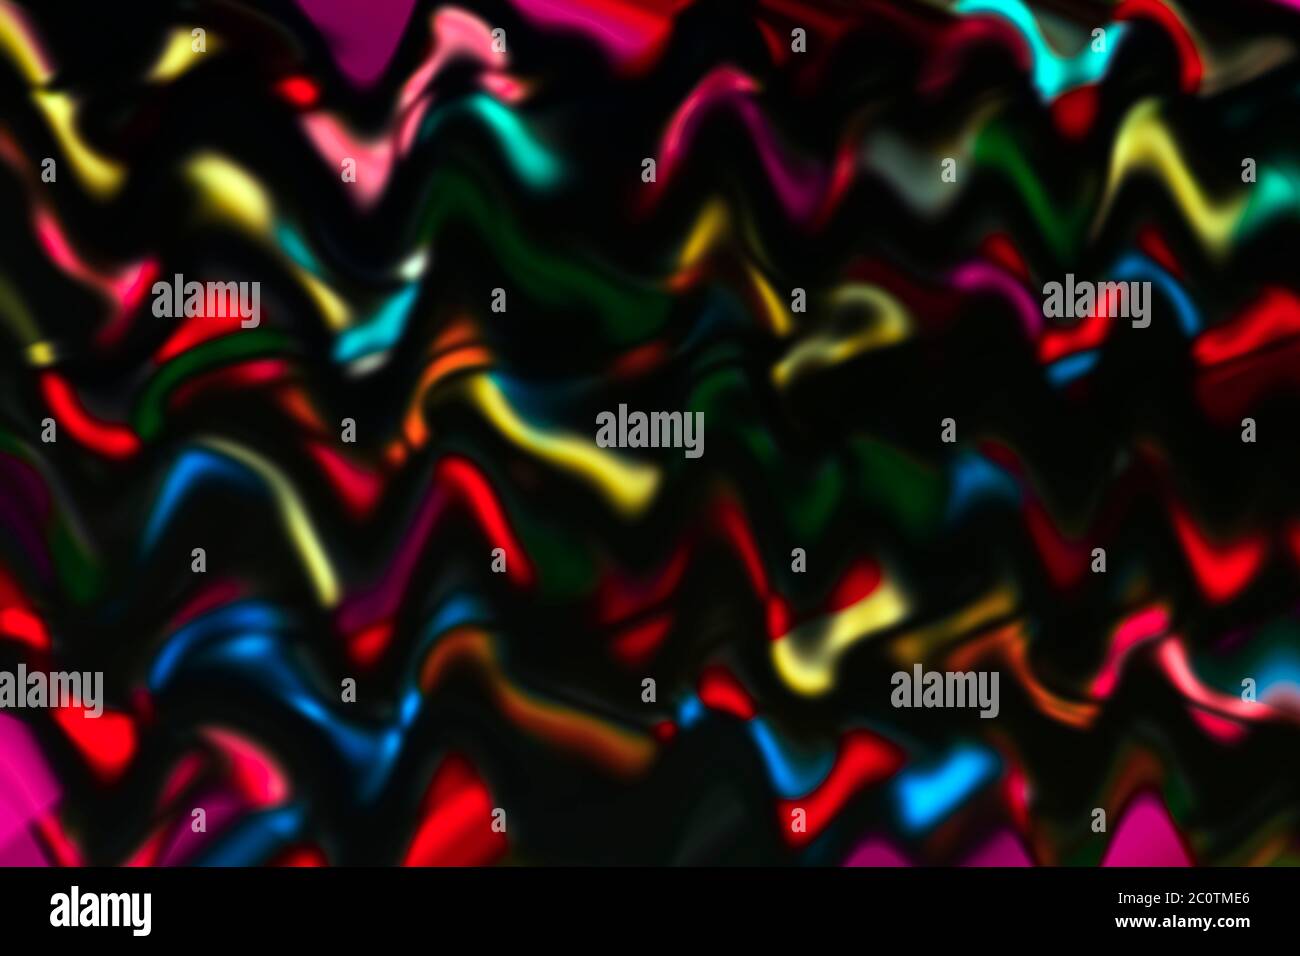 Background image with irregular wave pattern on black with red, yellow, blue colors Stock Photo